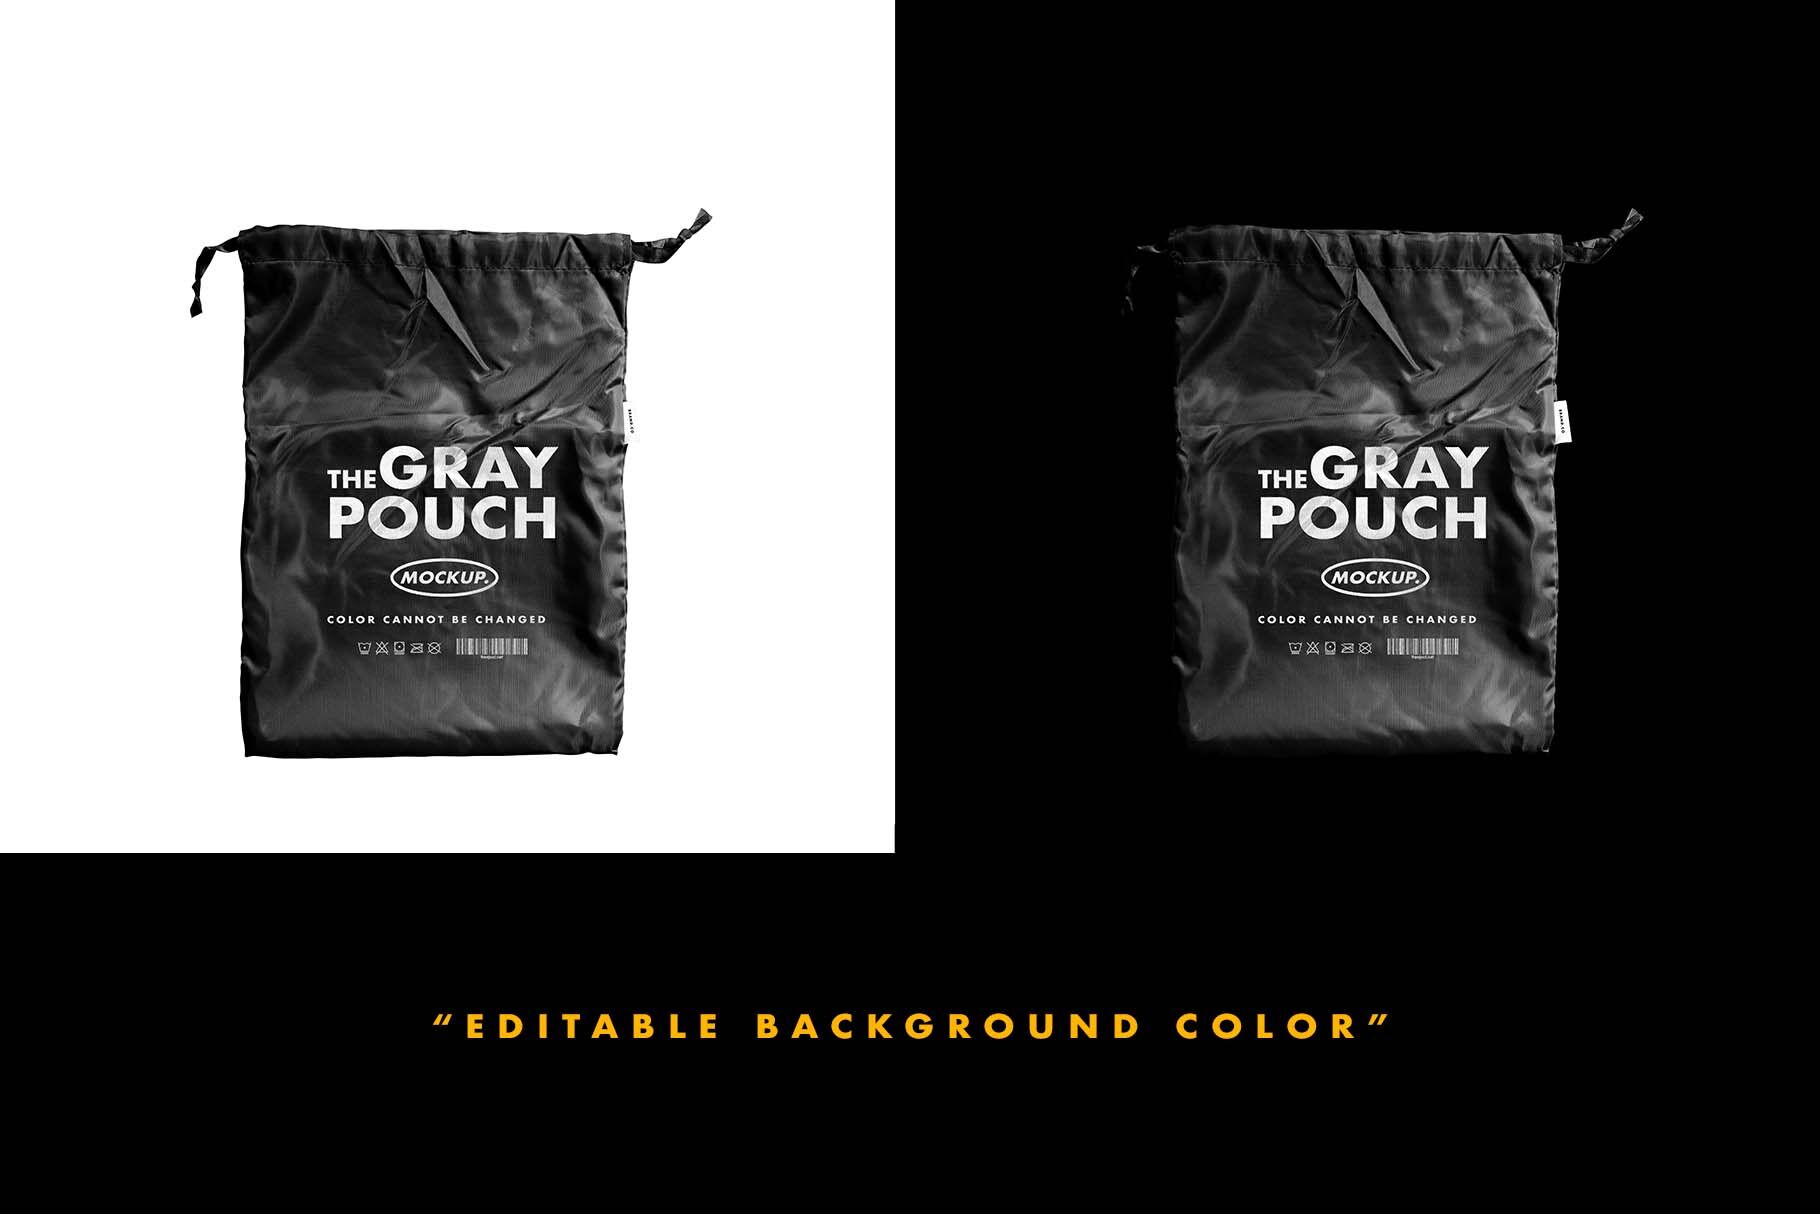 Drawstring Bag in the Front View Mockup FREE PSD